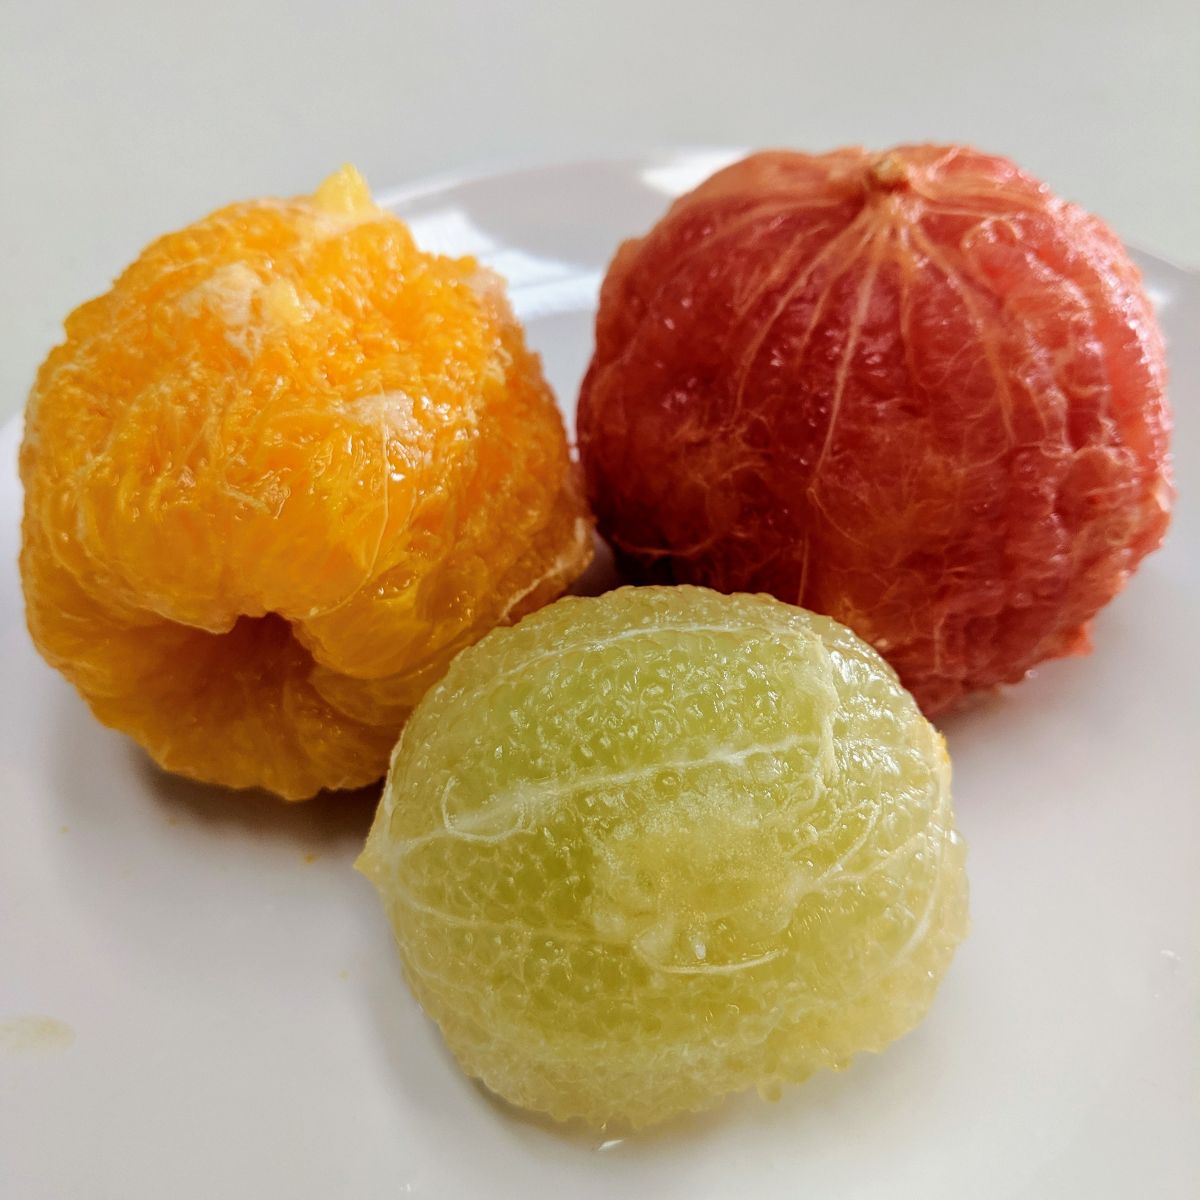 citrus fuit peeled with enzymes